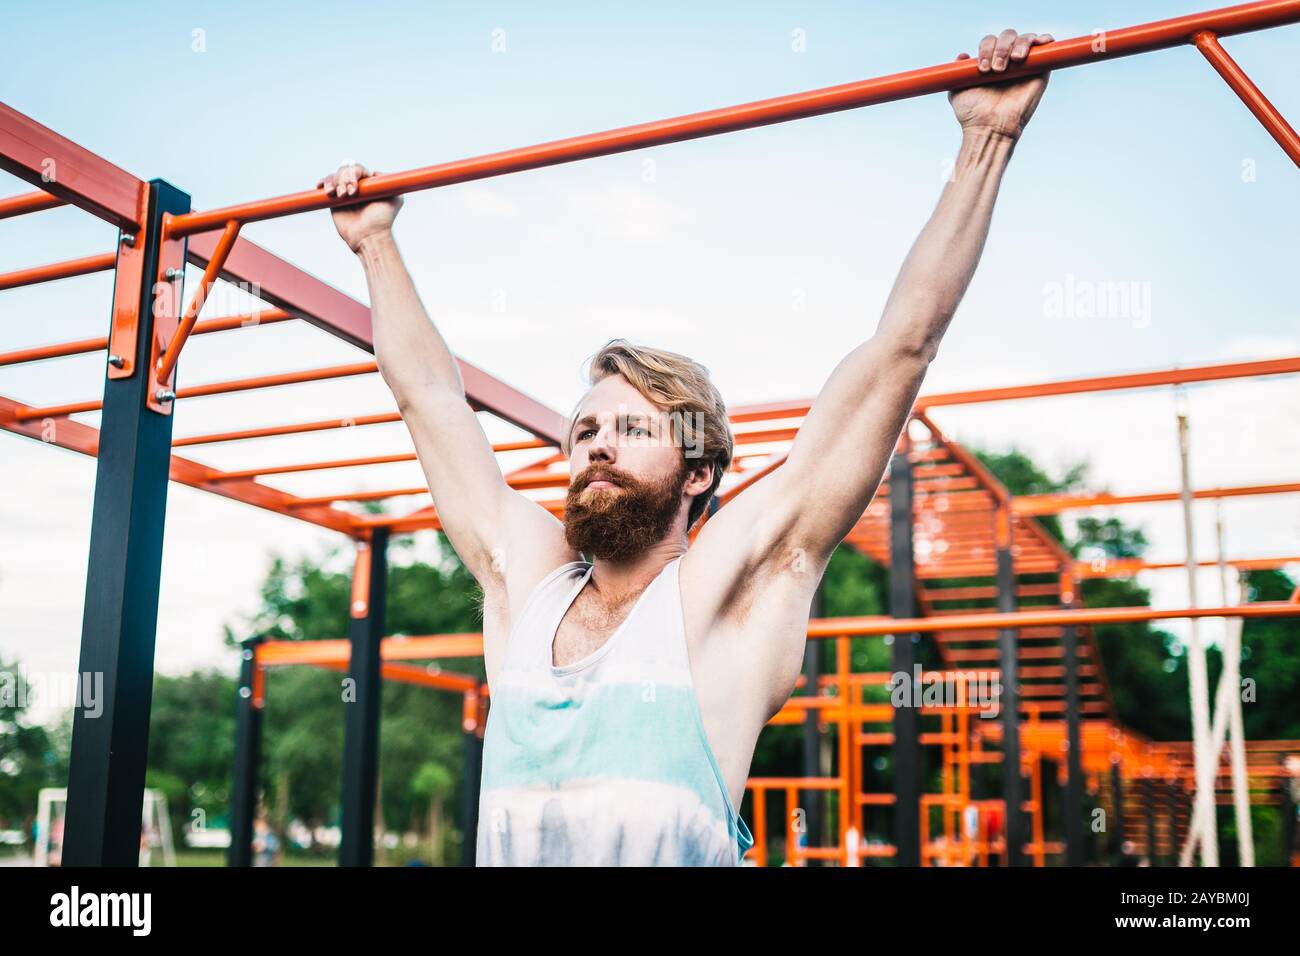 strong athlete doing pull-up on horizontal bar. Muscular man doing pull ups on horizontal bar in park. Gymnastic Bar During Work Stock Photo